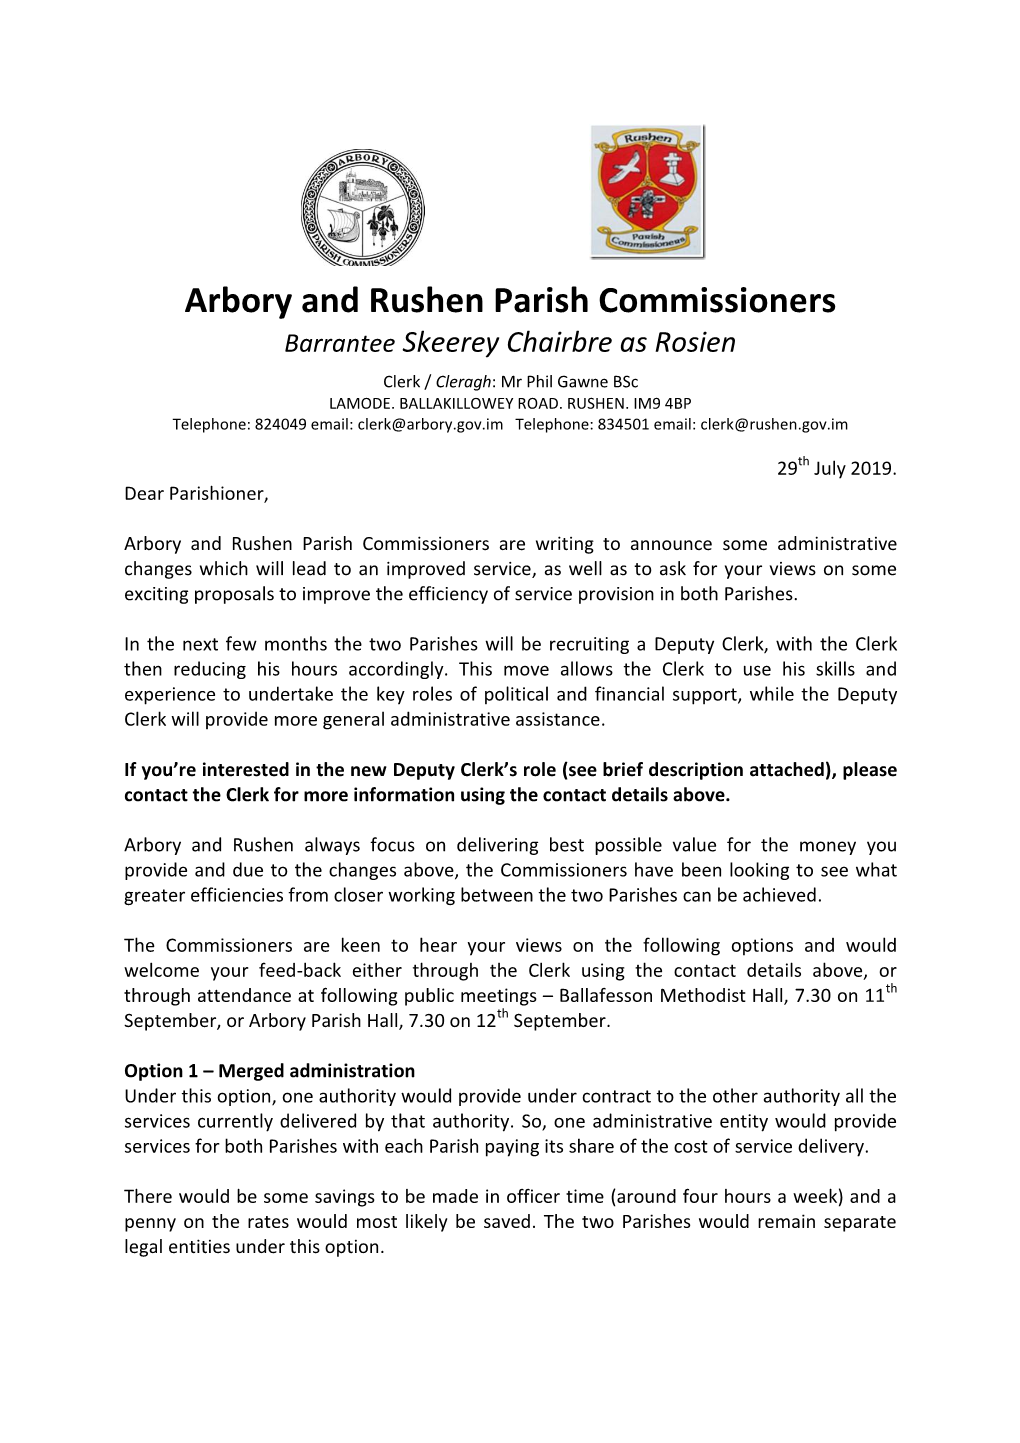 Arbory and Rushen Parish Commissioners Barrantee Skeerey Chairbre As Rosien